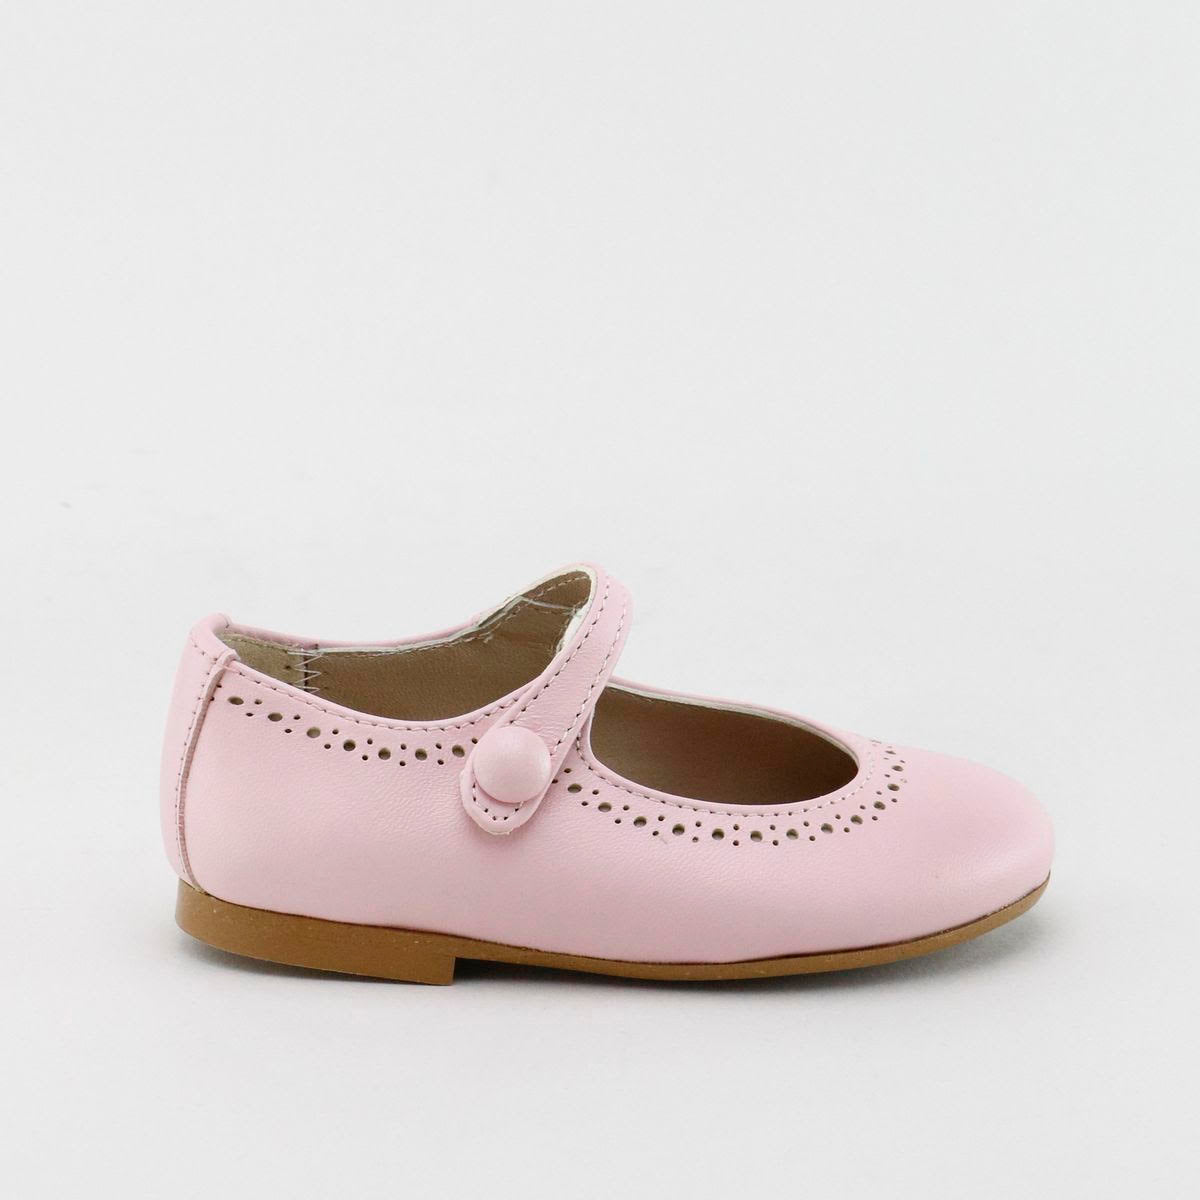 PAPANATAS PINK LEATHER DOTTED DESIGN ROUNDED MARY JANE [Final Sale] [FINAL SALE]